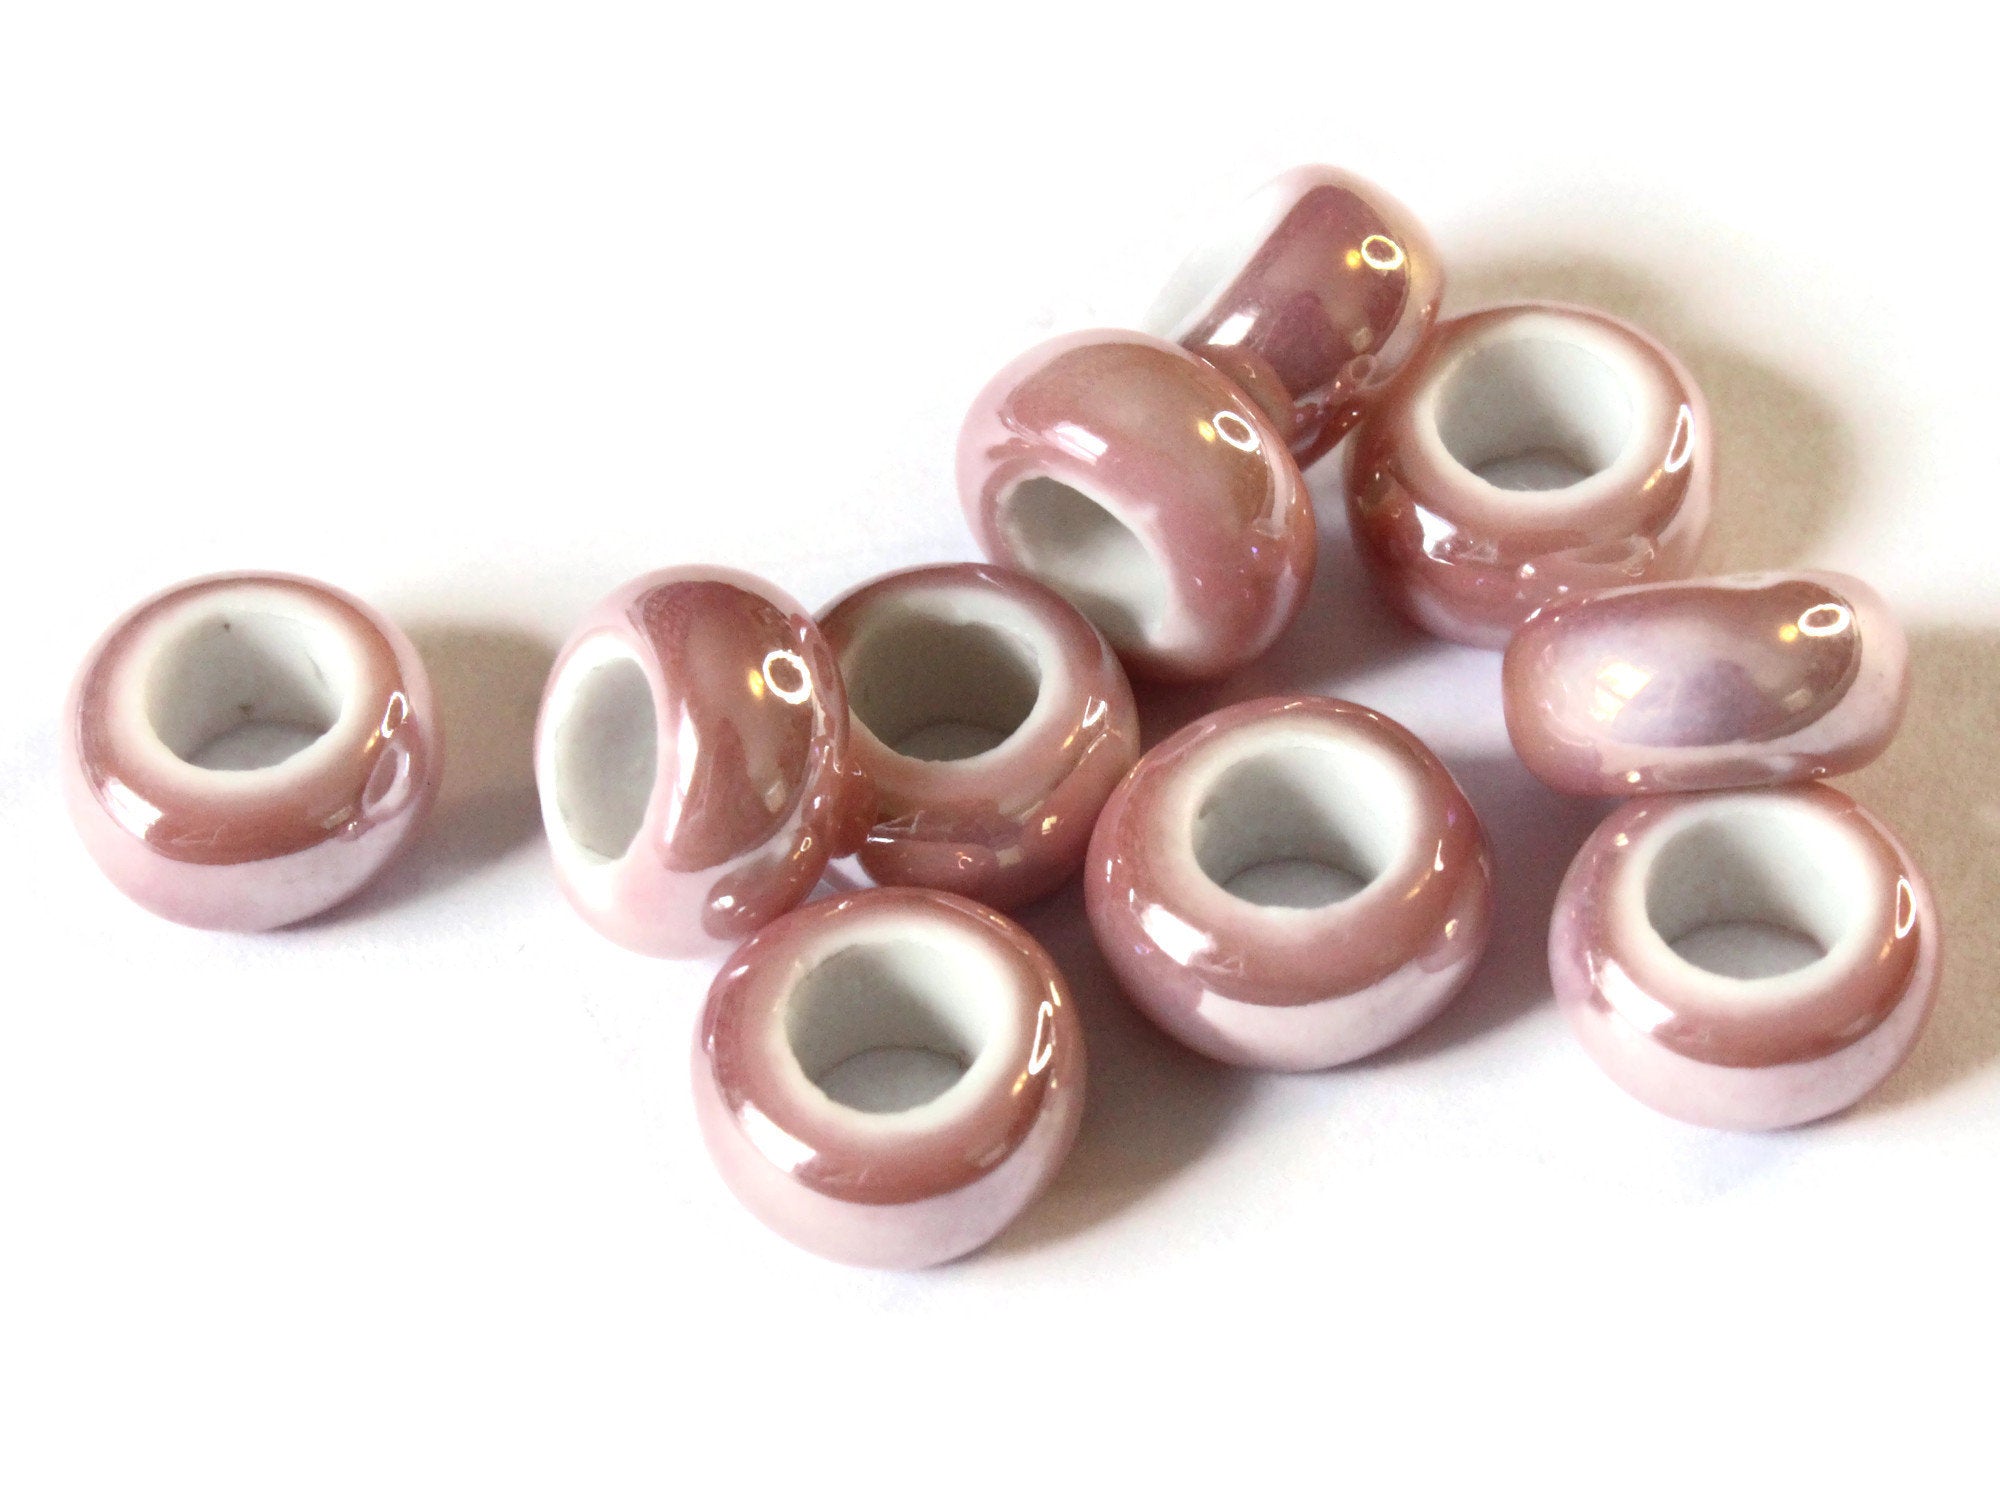 10 13mm Pink Porcelain Rondelle Beads - Large Hole Beads by Smileyboy Beads | Michaels